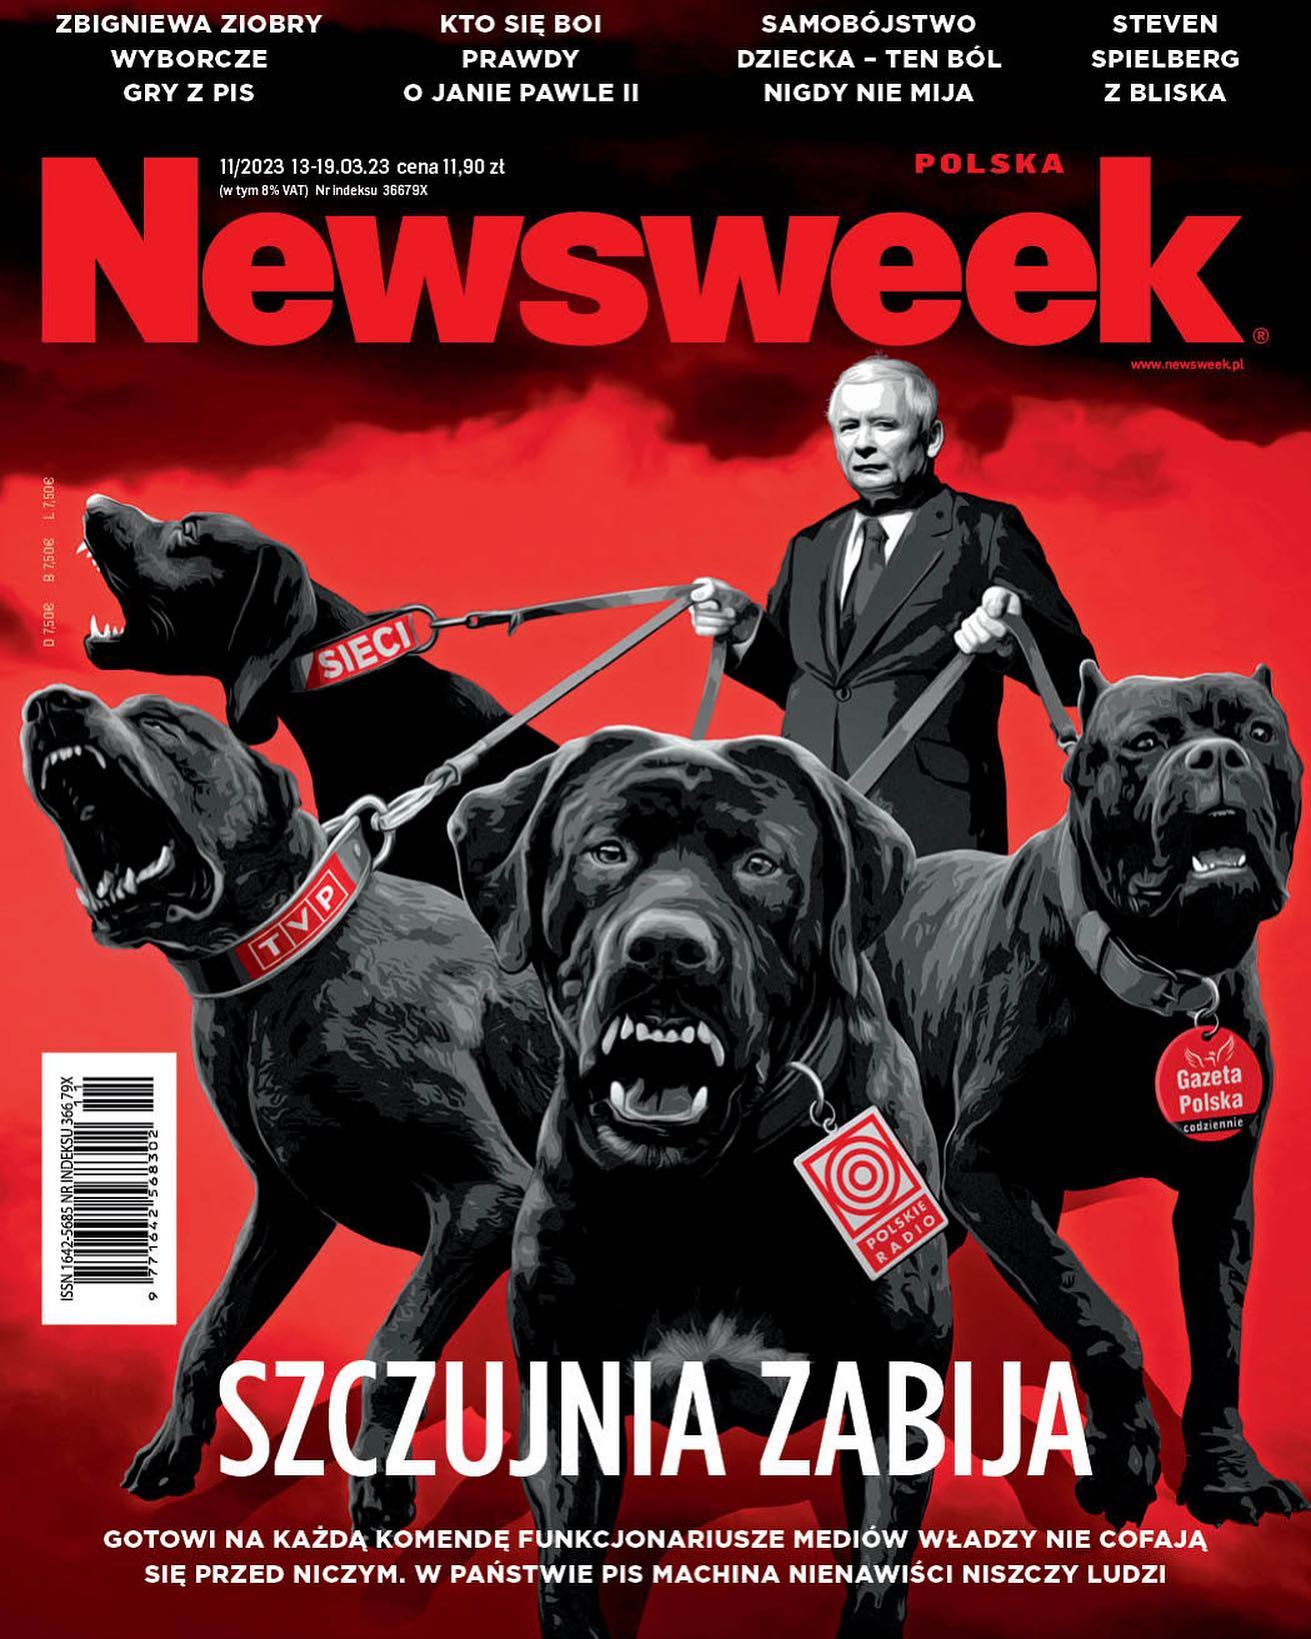 Newsweek cover page attacking conservative media (Source: Newsweek.pl)